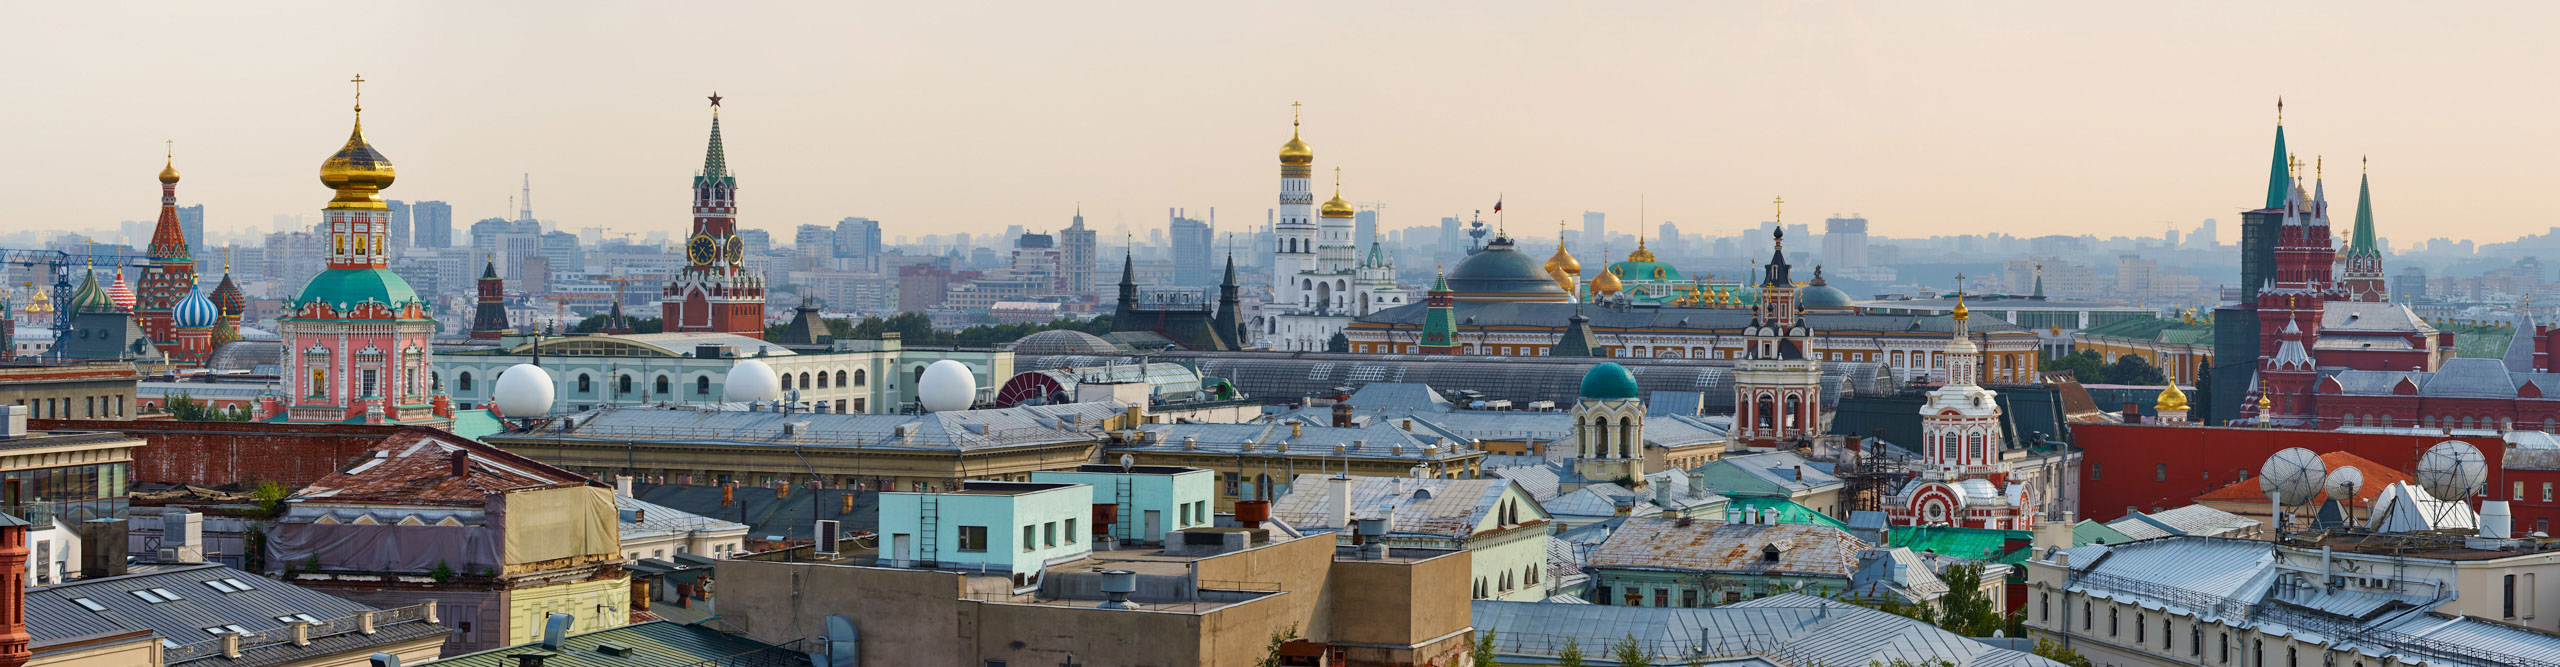 View of the Kremlim and rooftops in Moscow, Russia